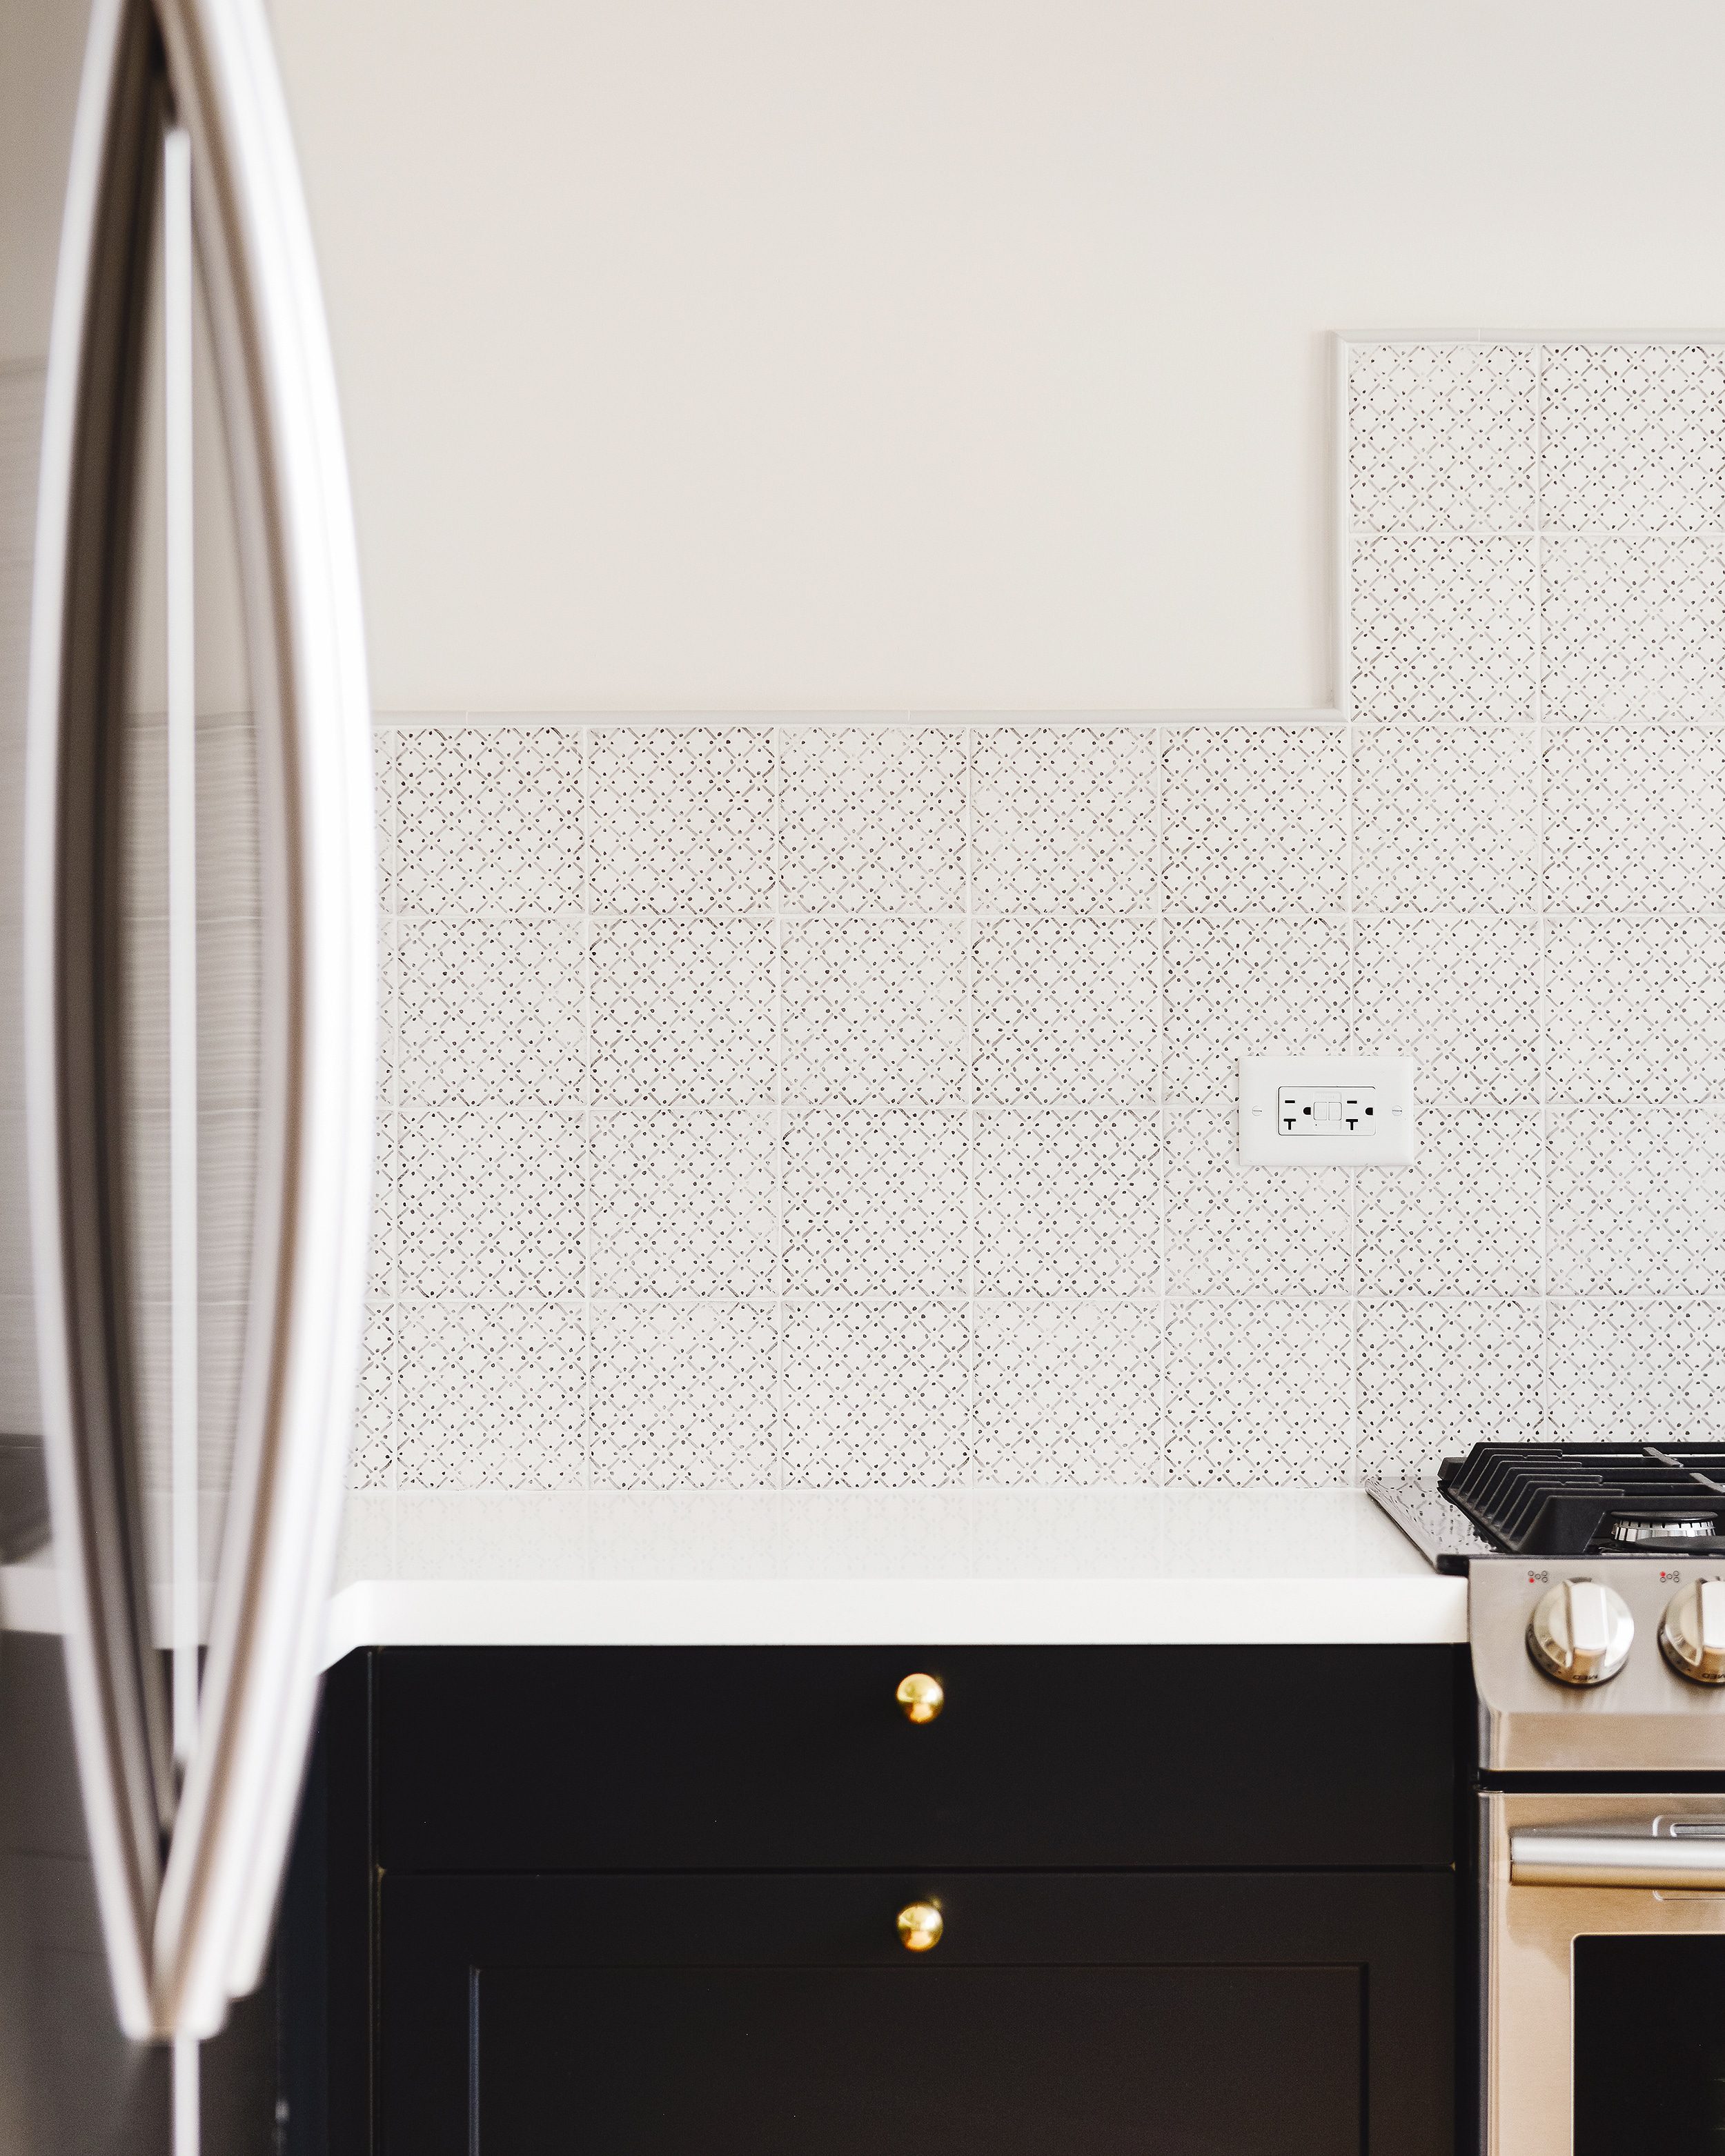 We're sharing the 5 things we do every single time we tile a backsplash that set us up for success. via Yellow Brick Home x @thetileshop #ad